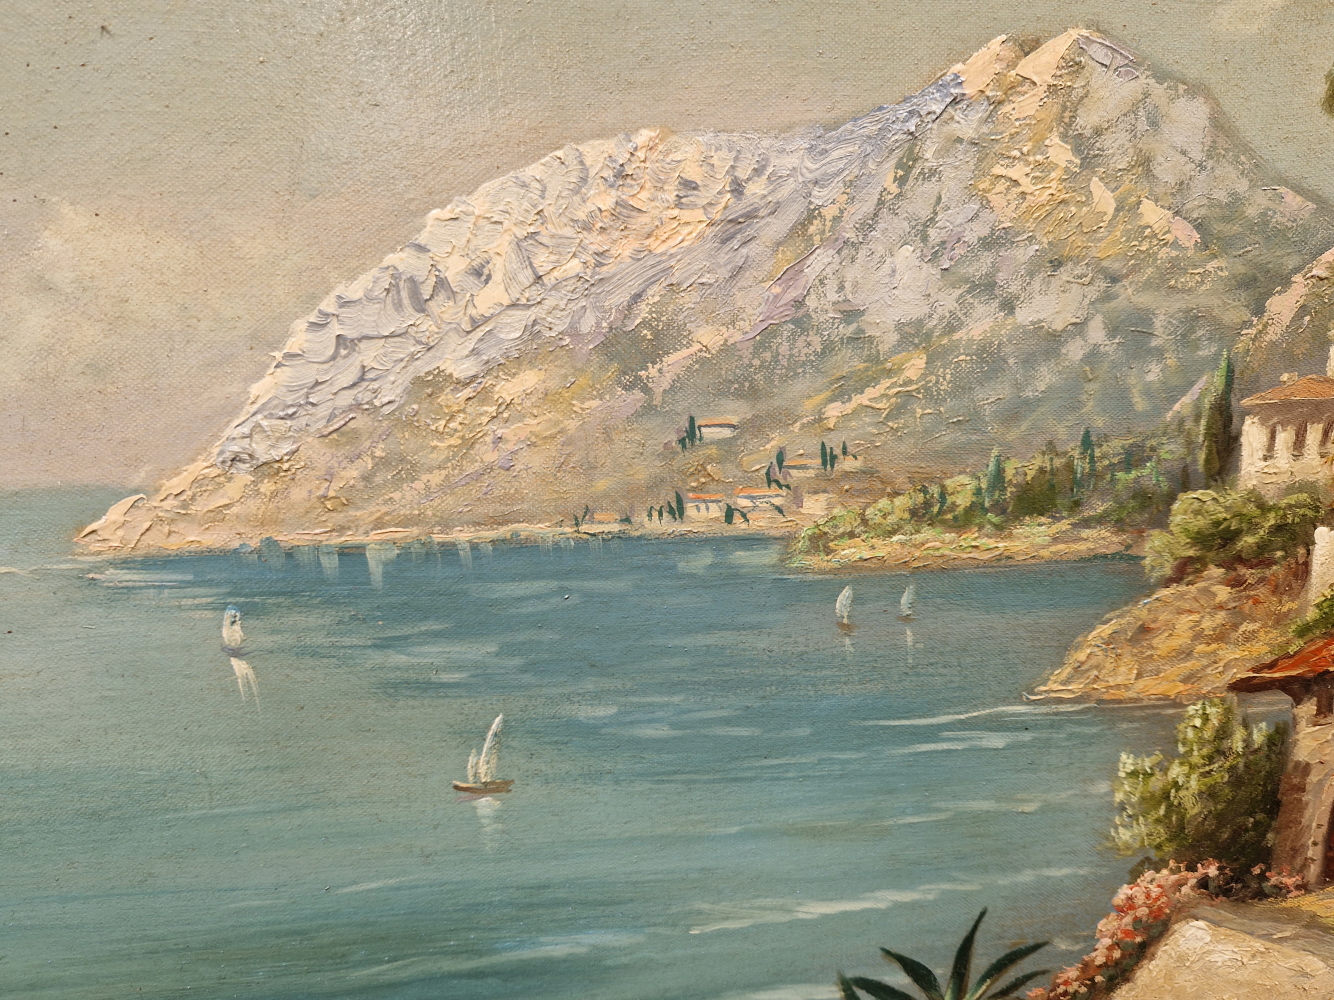 20th CENTURY CONTINENTAL SCHOOL A COASTAL VIEW, SIGNED INDISTINCTLY, OIL ON CANVAS. 50 x 100cms - Image 5 of 10